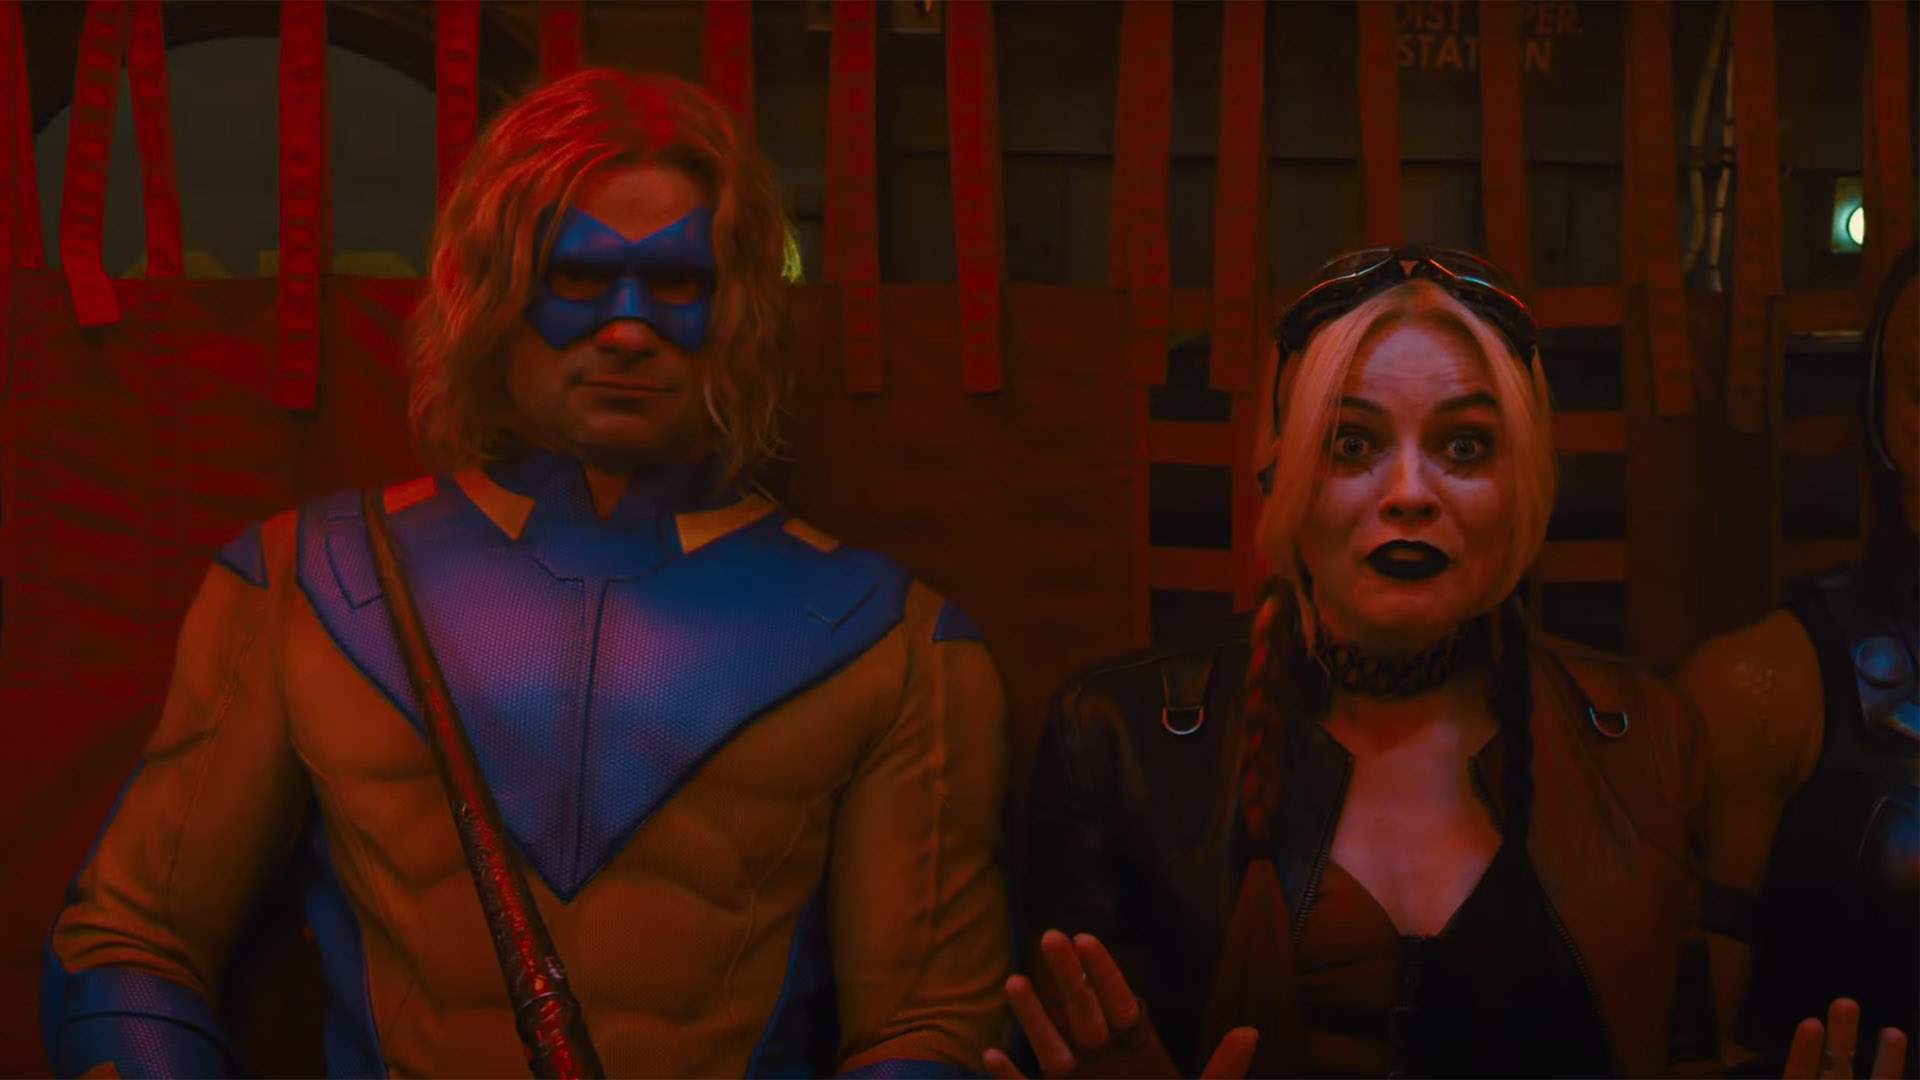 The Latest Trailer for 'The Suicide Squad' Pairs Up Old Favourites with New Supervillains